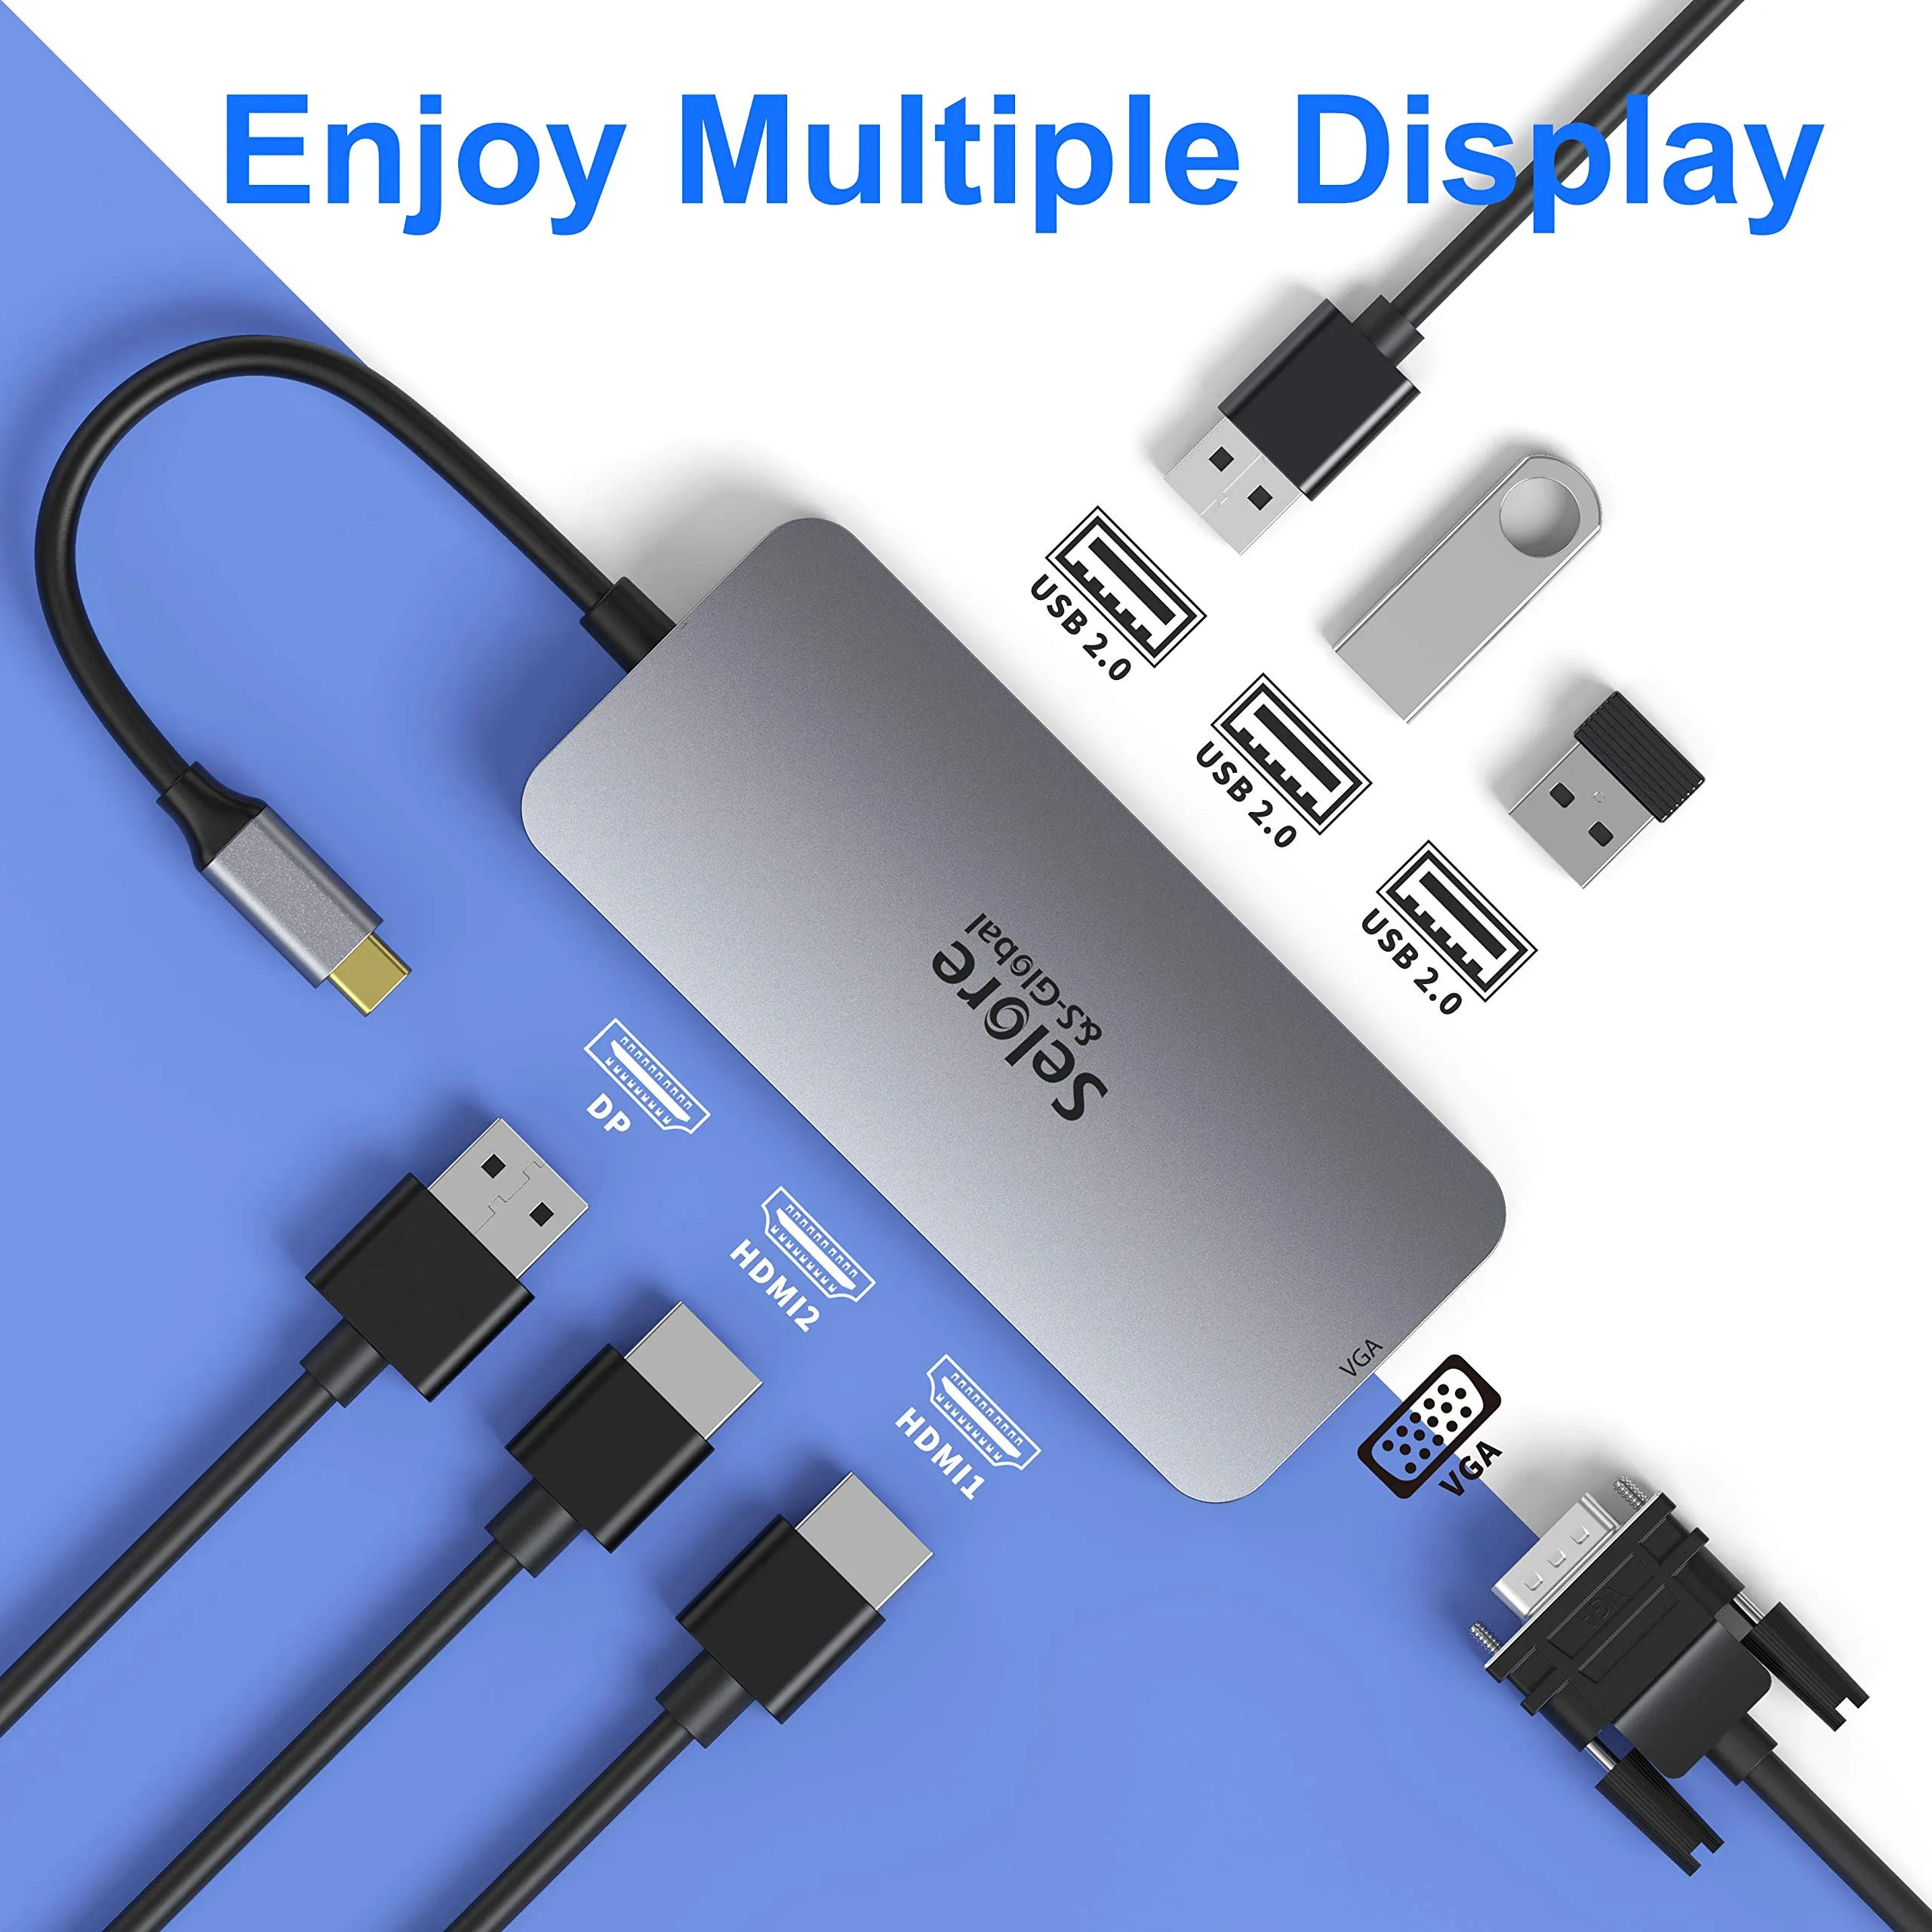 MacBook Pro Docking Station Dual Monitor HDMI Adapter,12 in 1 USB C  Adapters for MacBook Pro Air Mac HDMI Dock Dongle Dual USB C to Dual HDMI  VGA